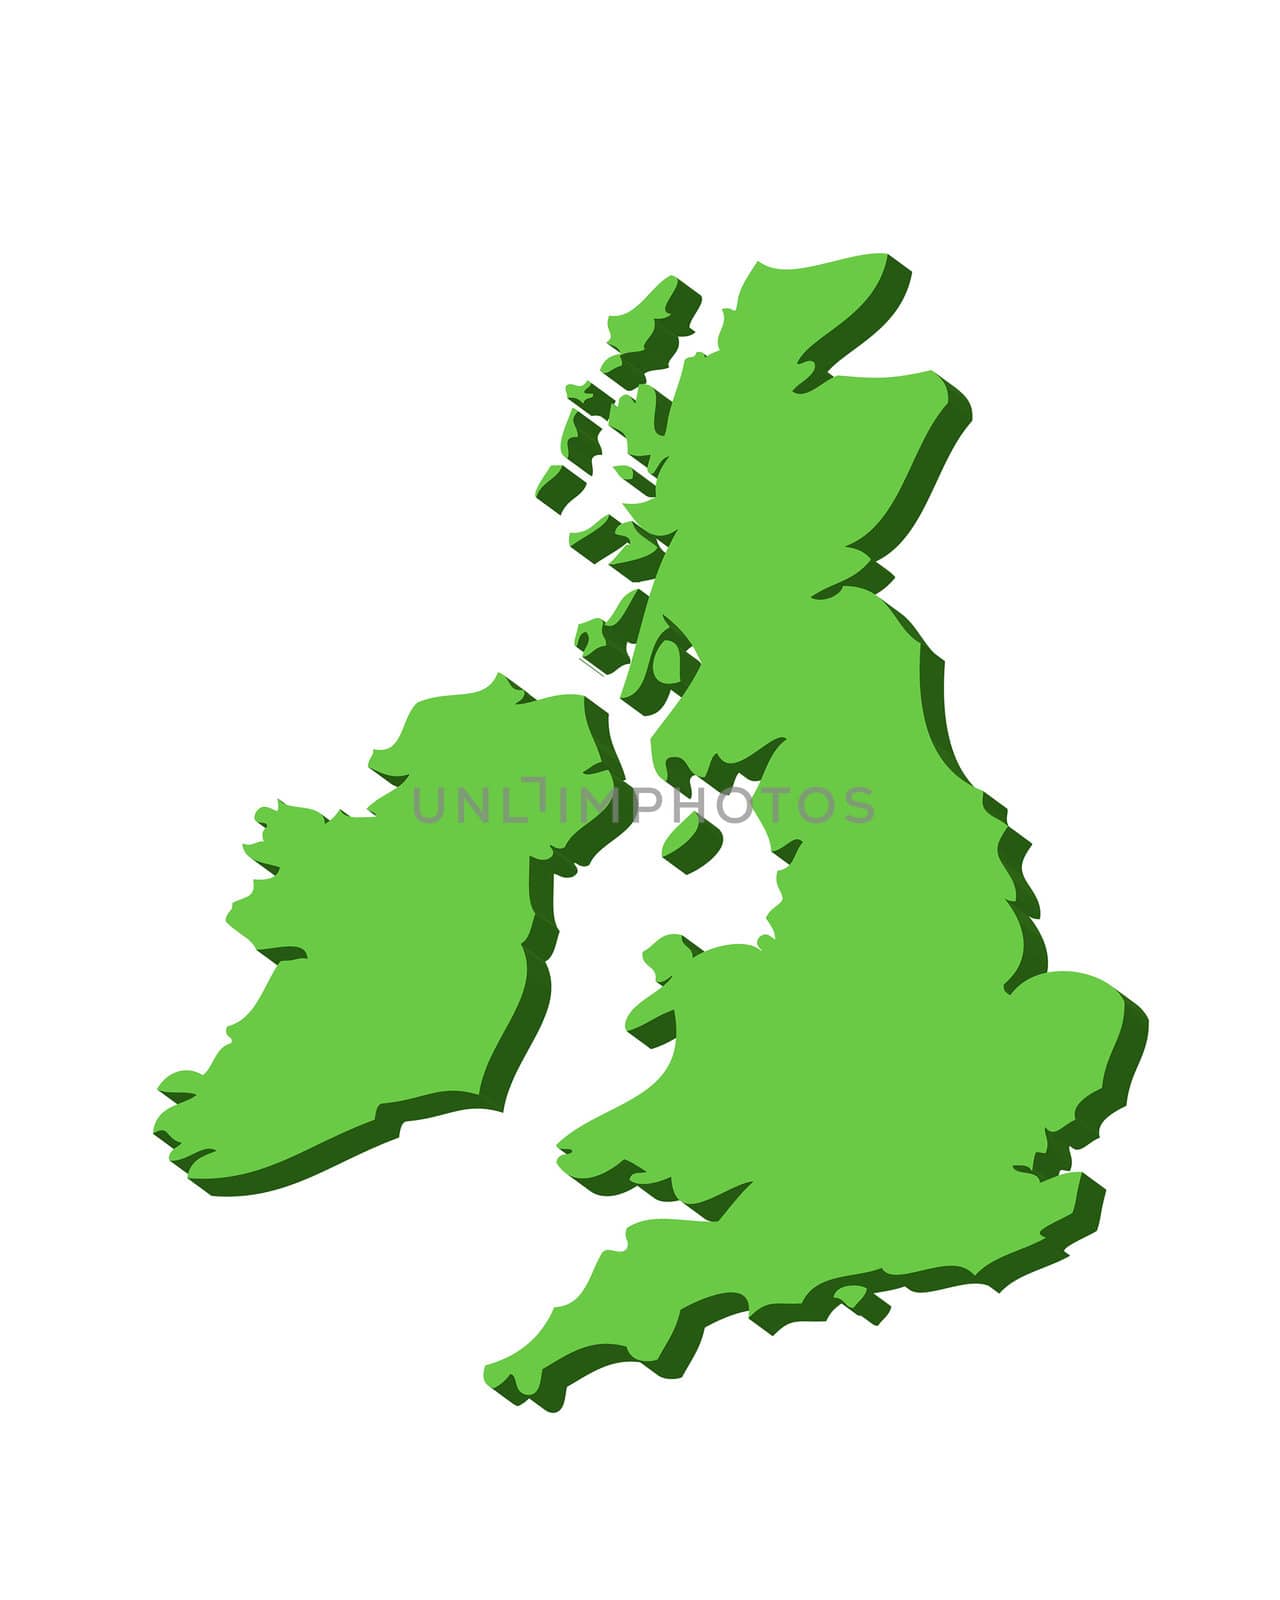 UK and Ireland by yorkman